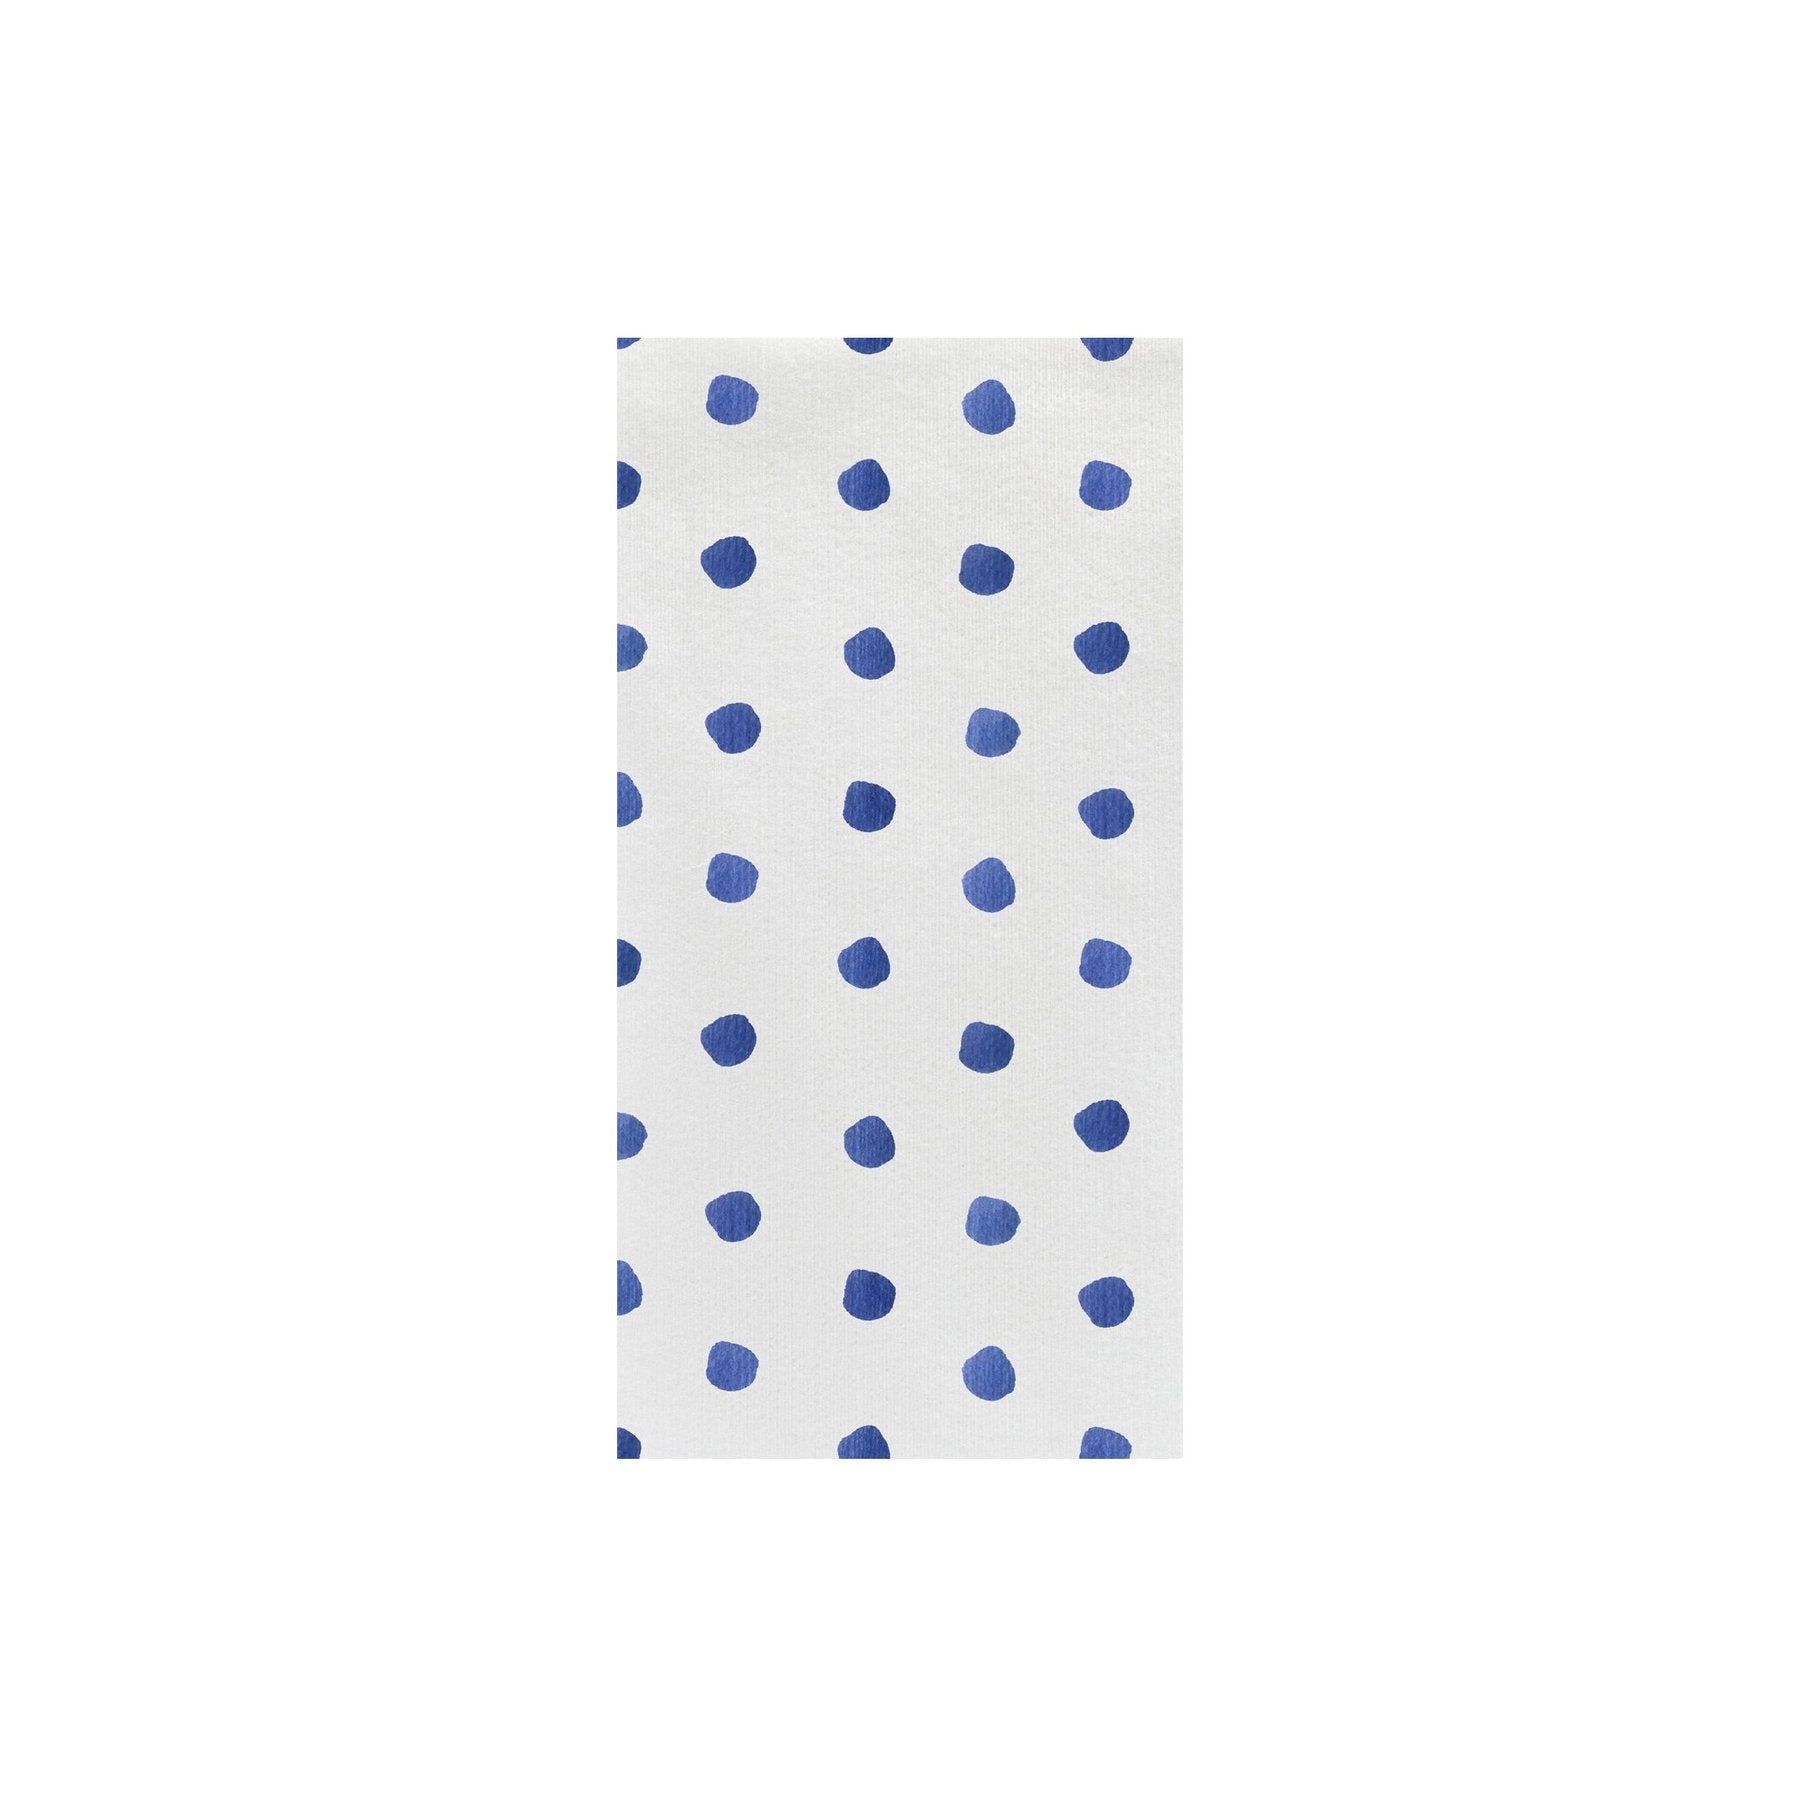 Papersoft Napkins Blue Dot Guest Towels - Pack of 20